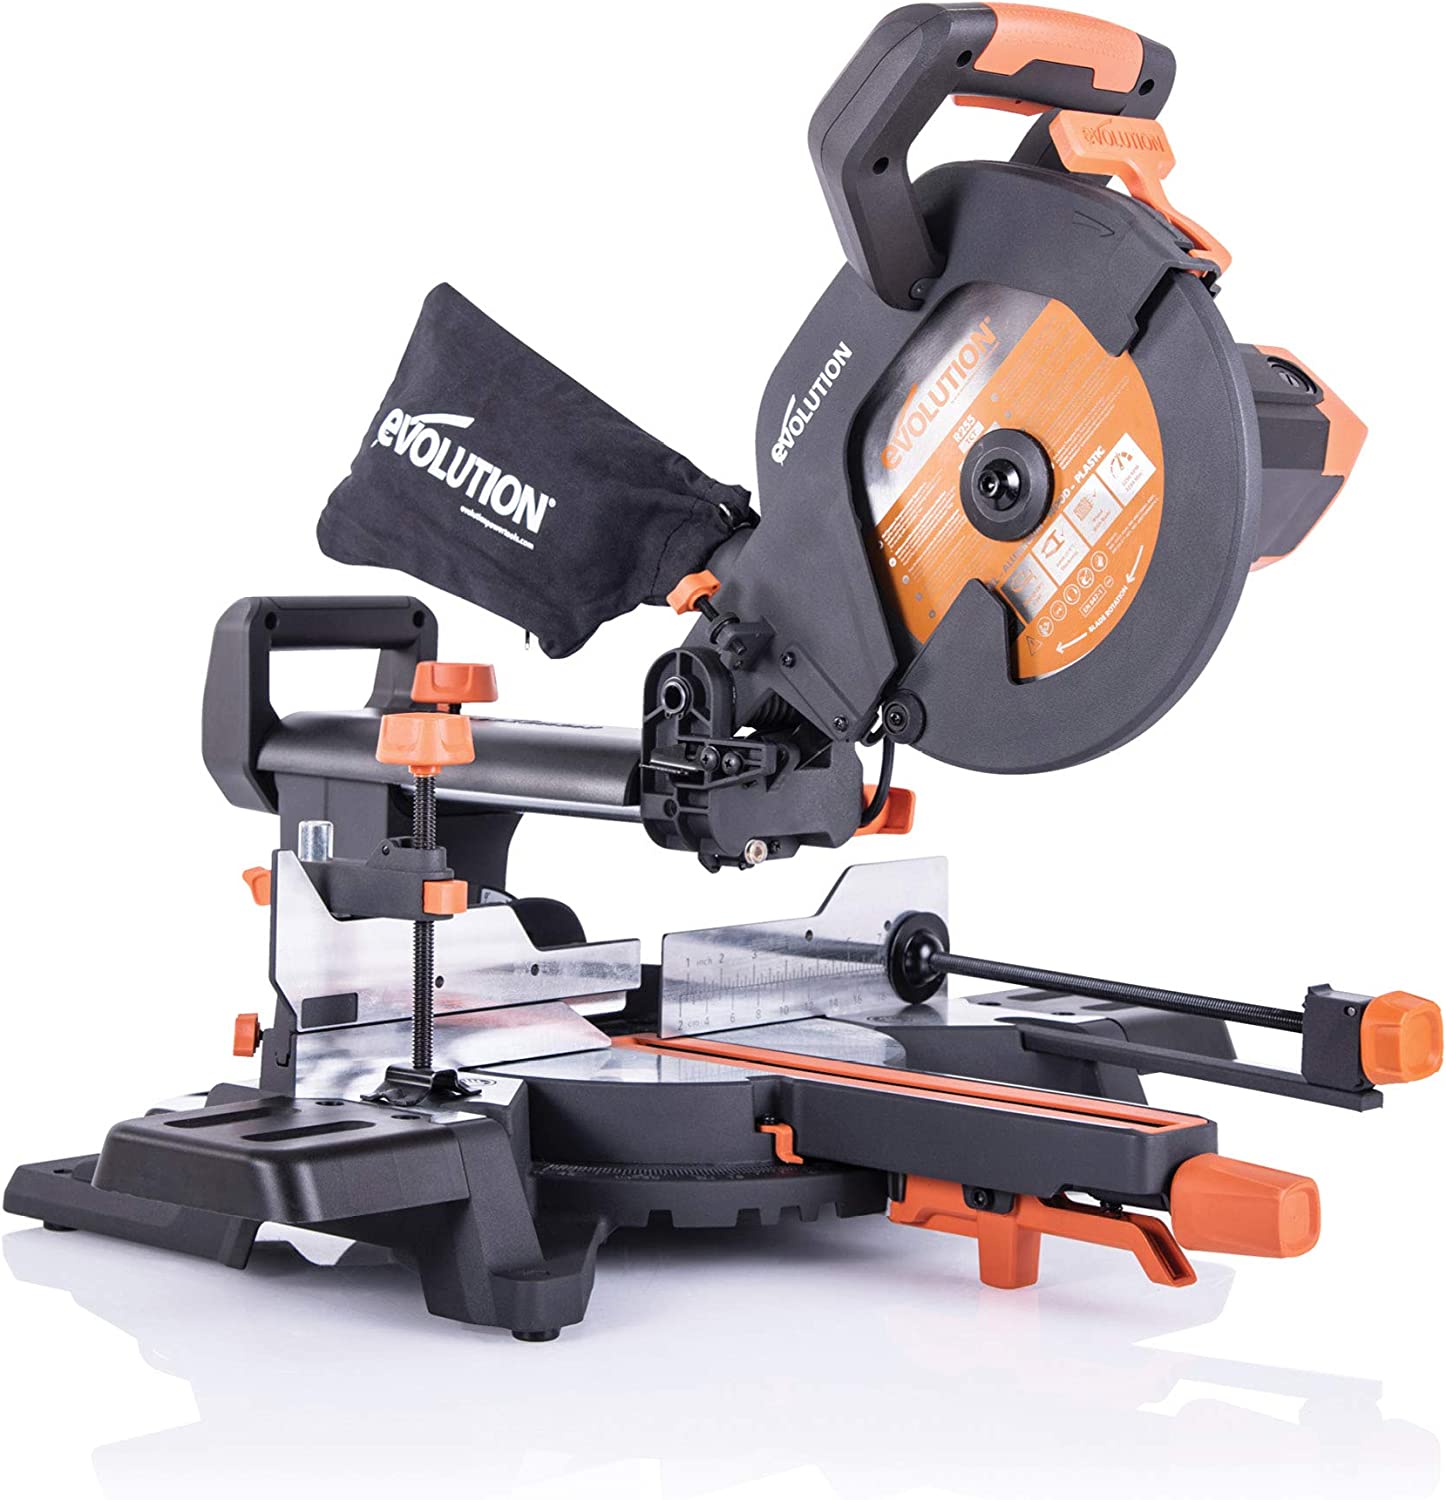 Evolution Power Tools R255SMS+ Compound Saw with Multi-Material Cutting, 45° Bevel, 50° Mitre, 300 mm Slide, 2000 W, 255 mm, 220-240 V